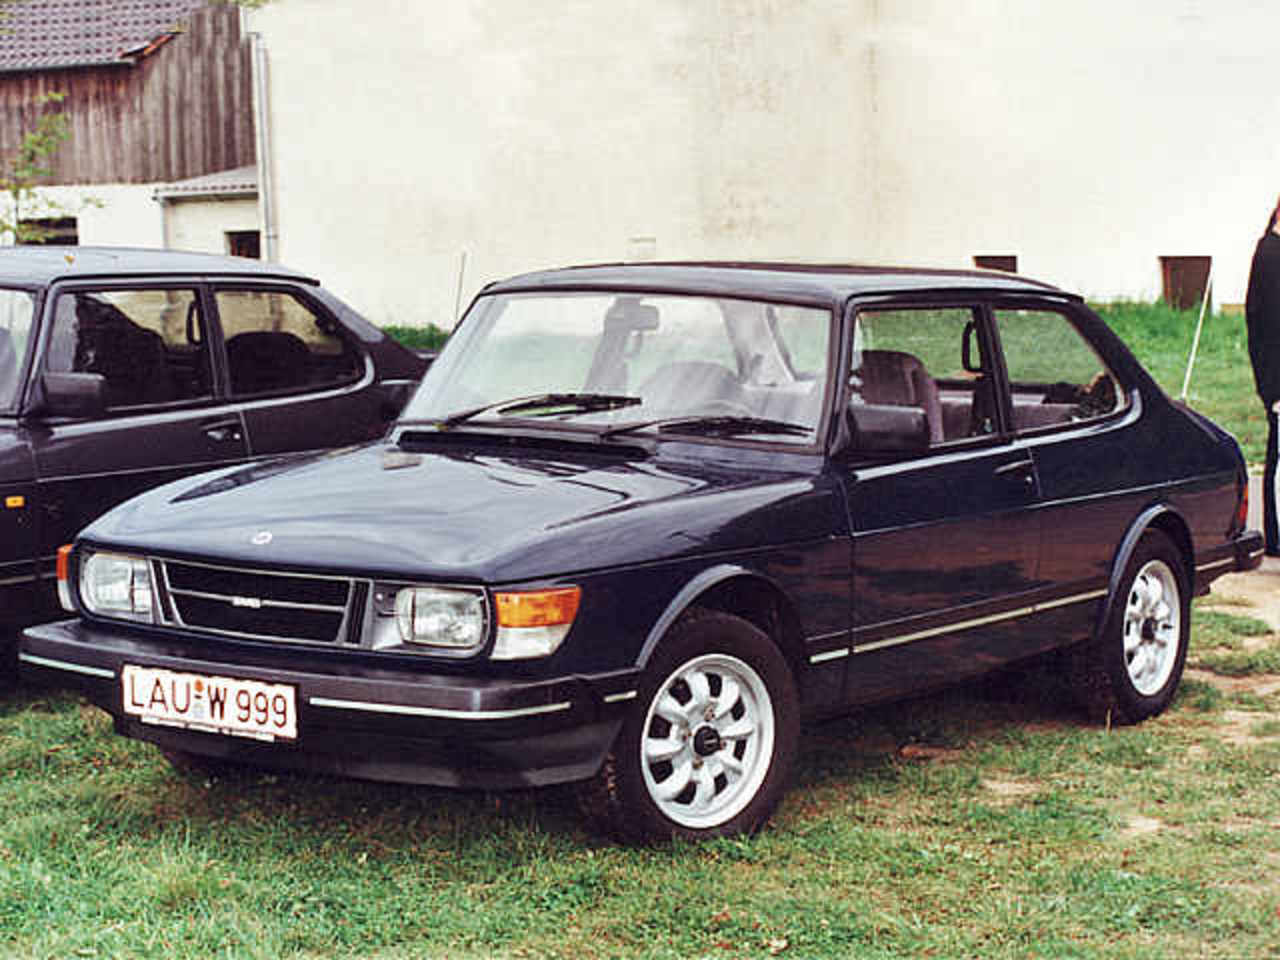 Saab 900 23I Photo Gallery: Photo #08 out of 12, Image Size - 500 ...